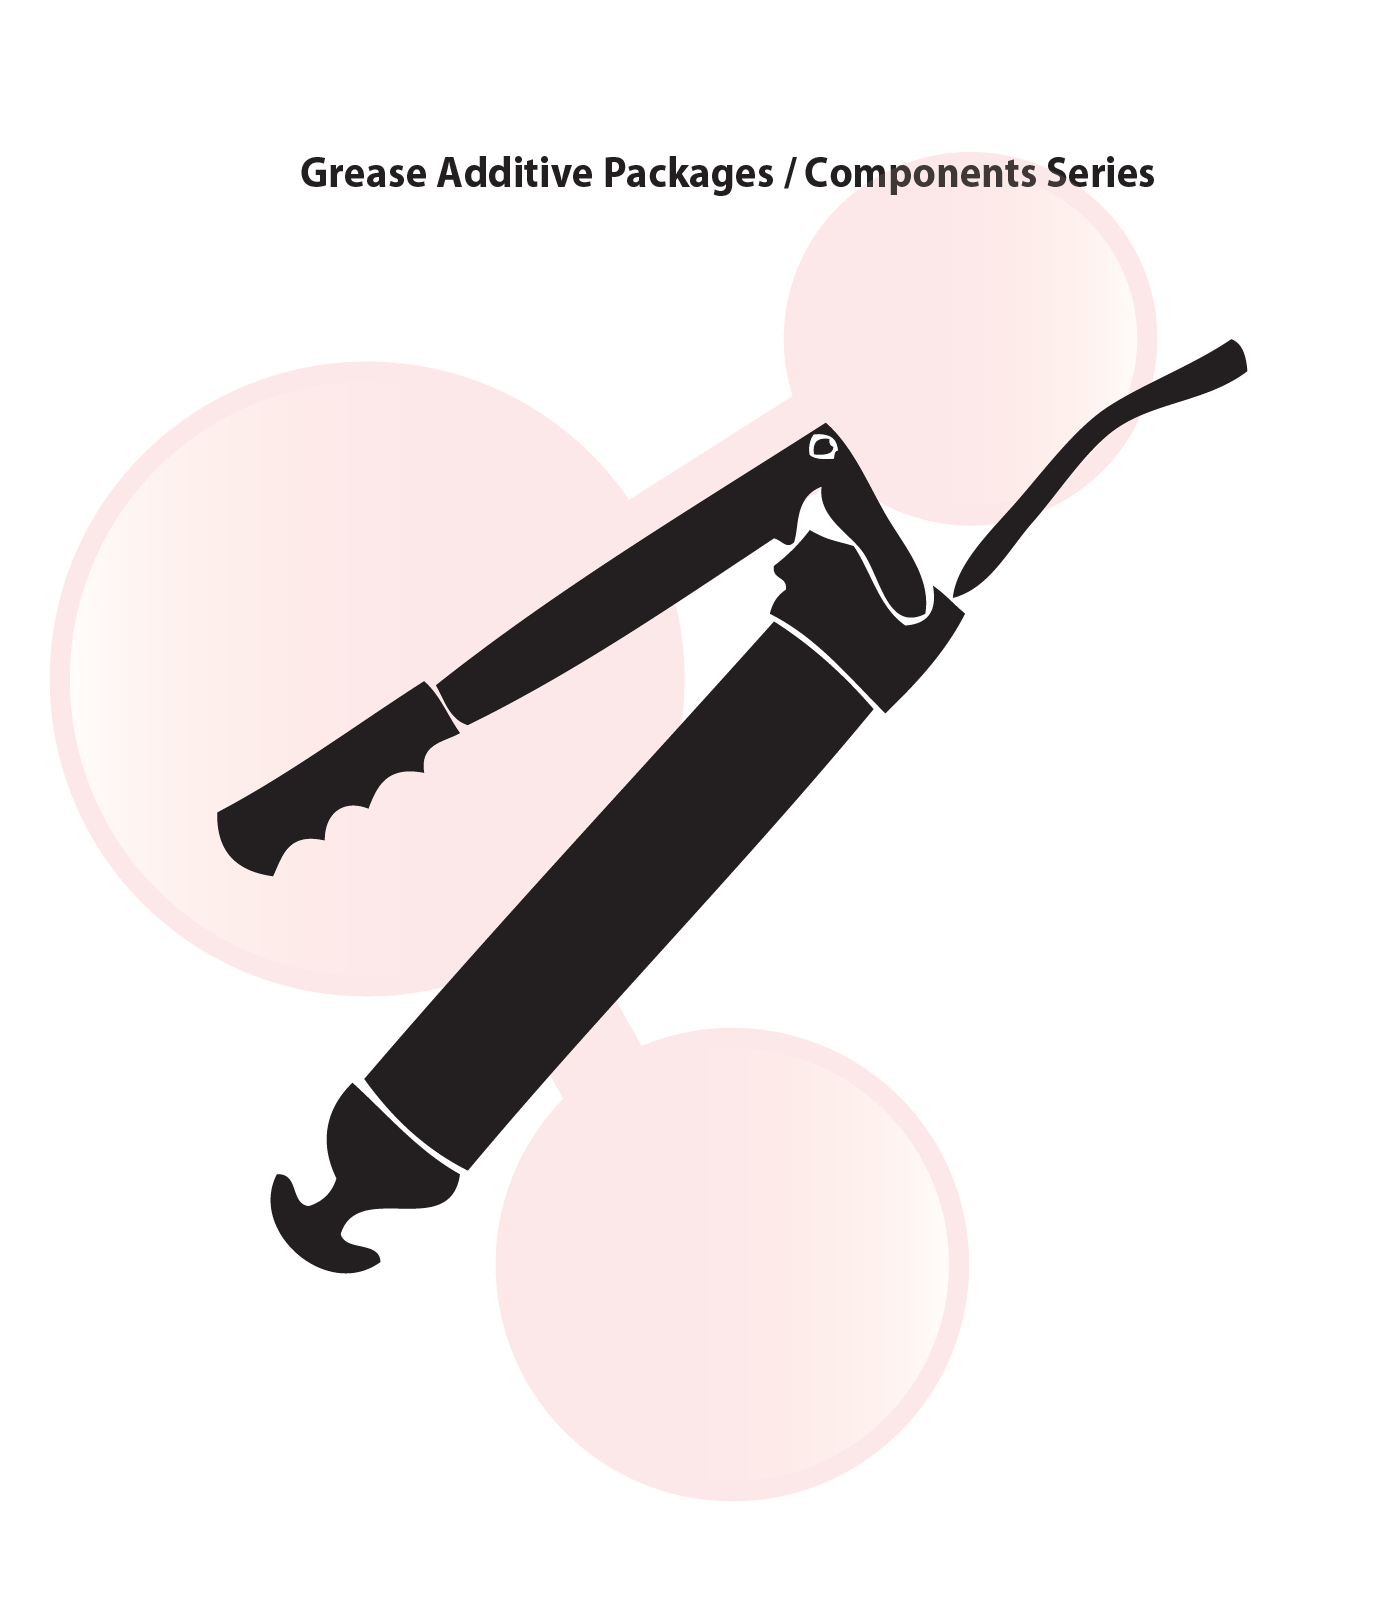 Grease Additive Packages / Components Series